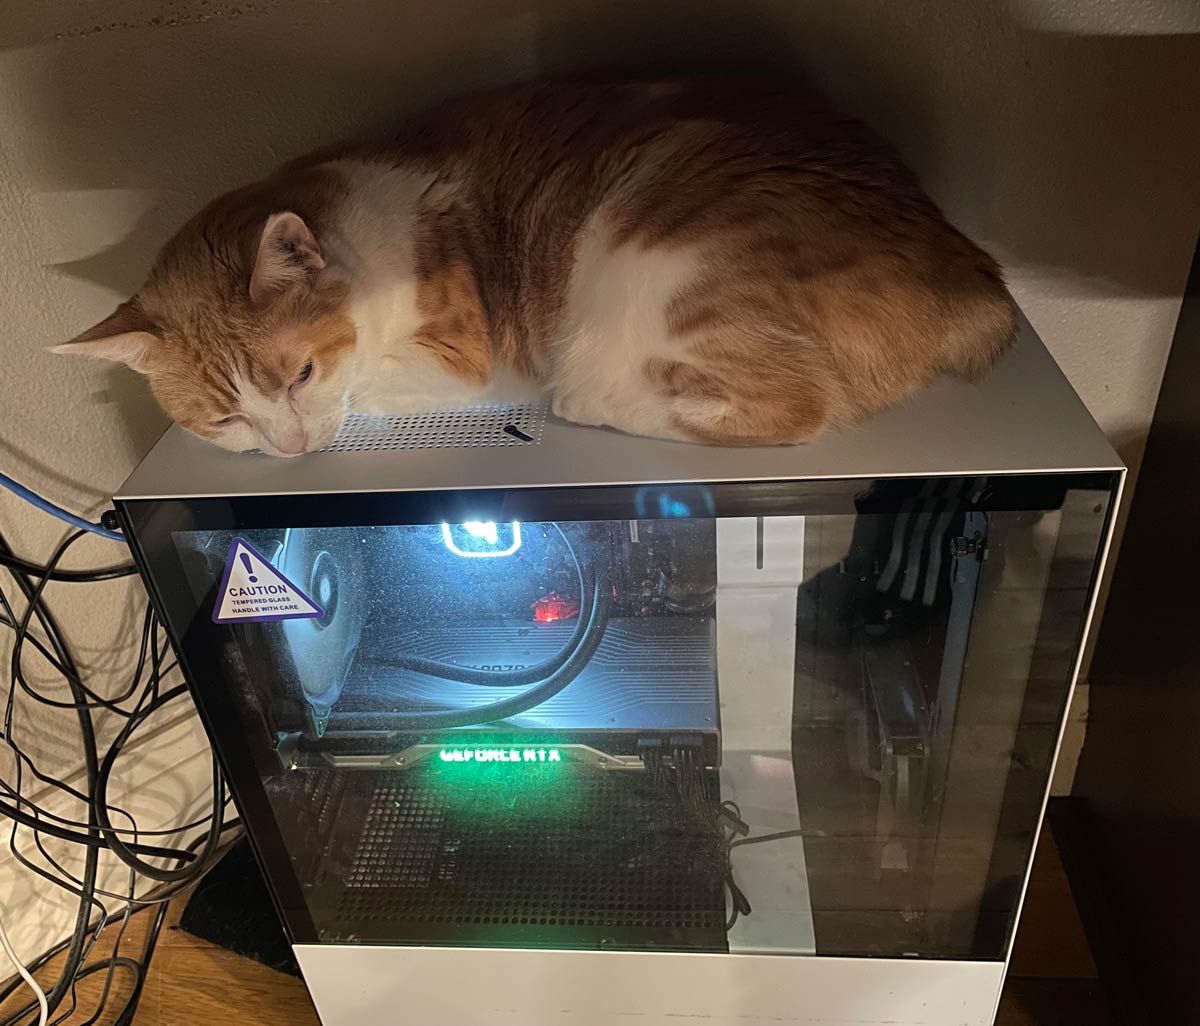 Found out why my PC kept overheating